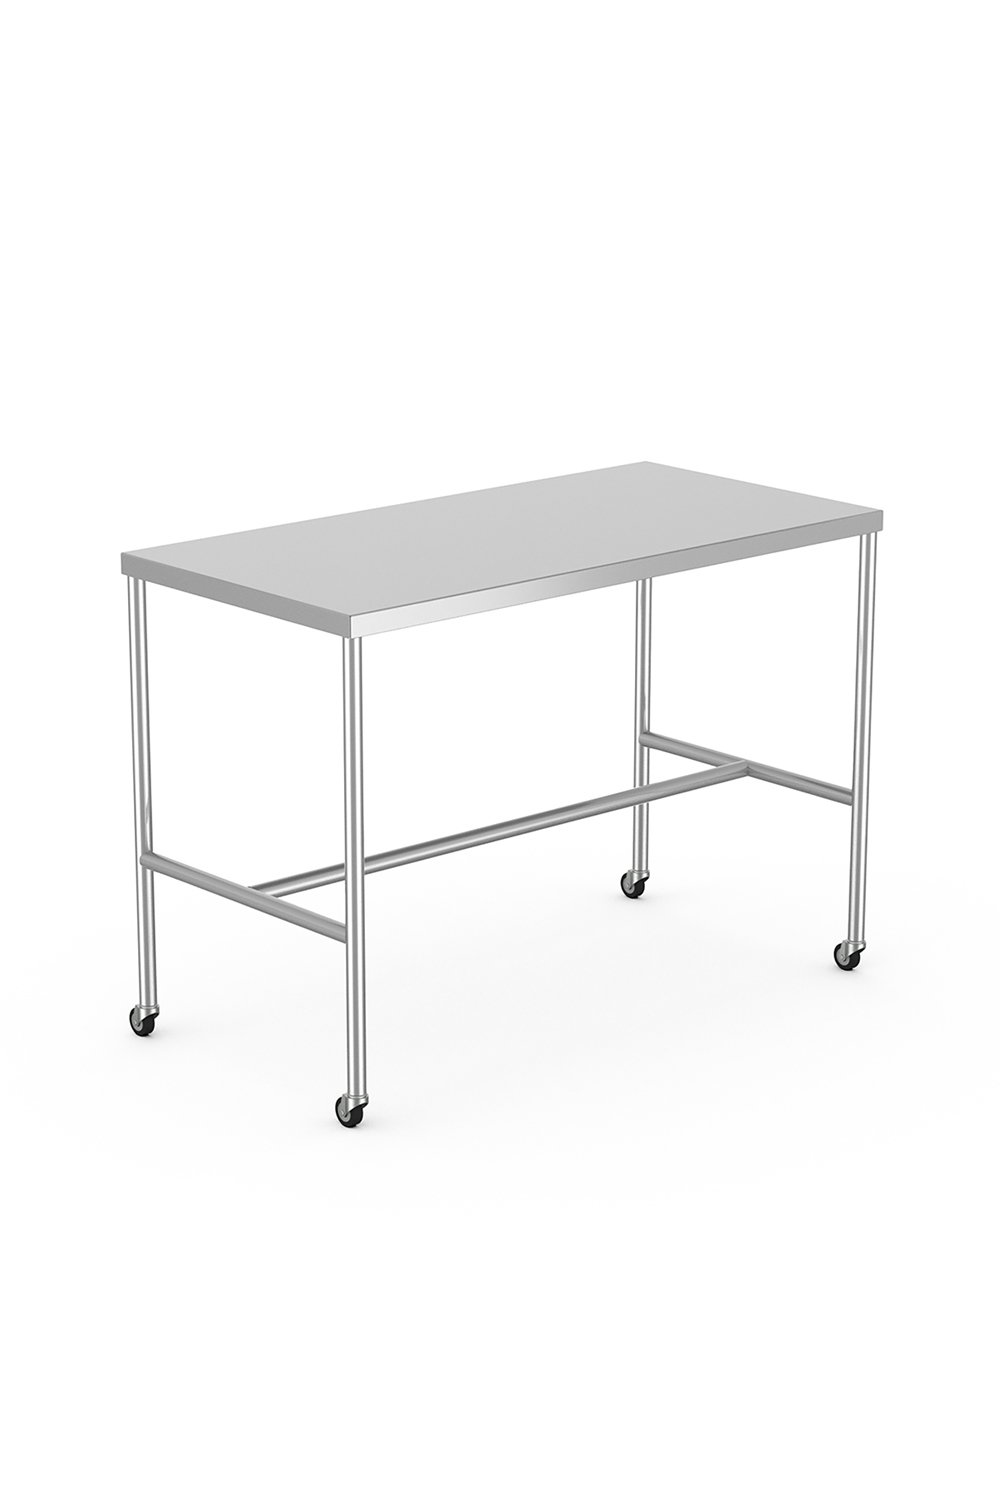 Stainless Steel Table Stainless Solutions Macmedical 24"D x 48"W x 34"H H-Brace 